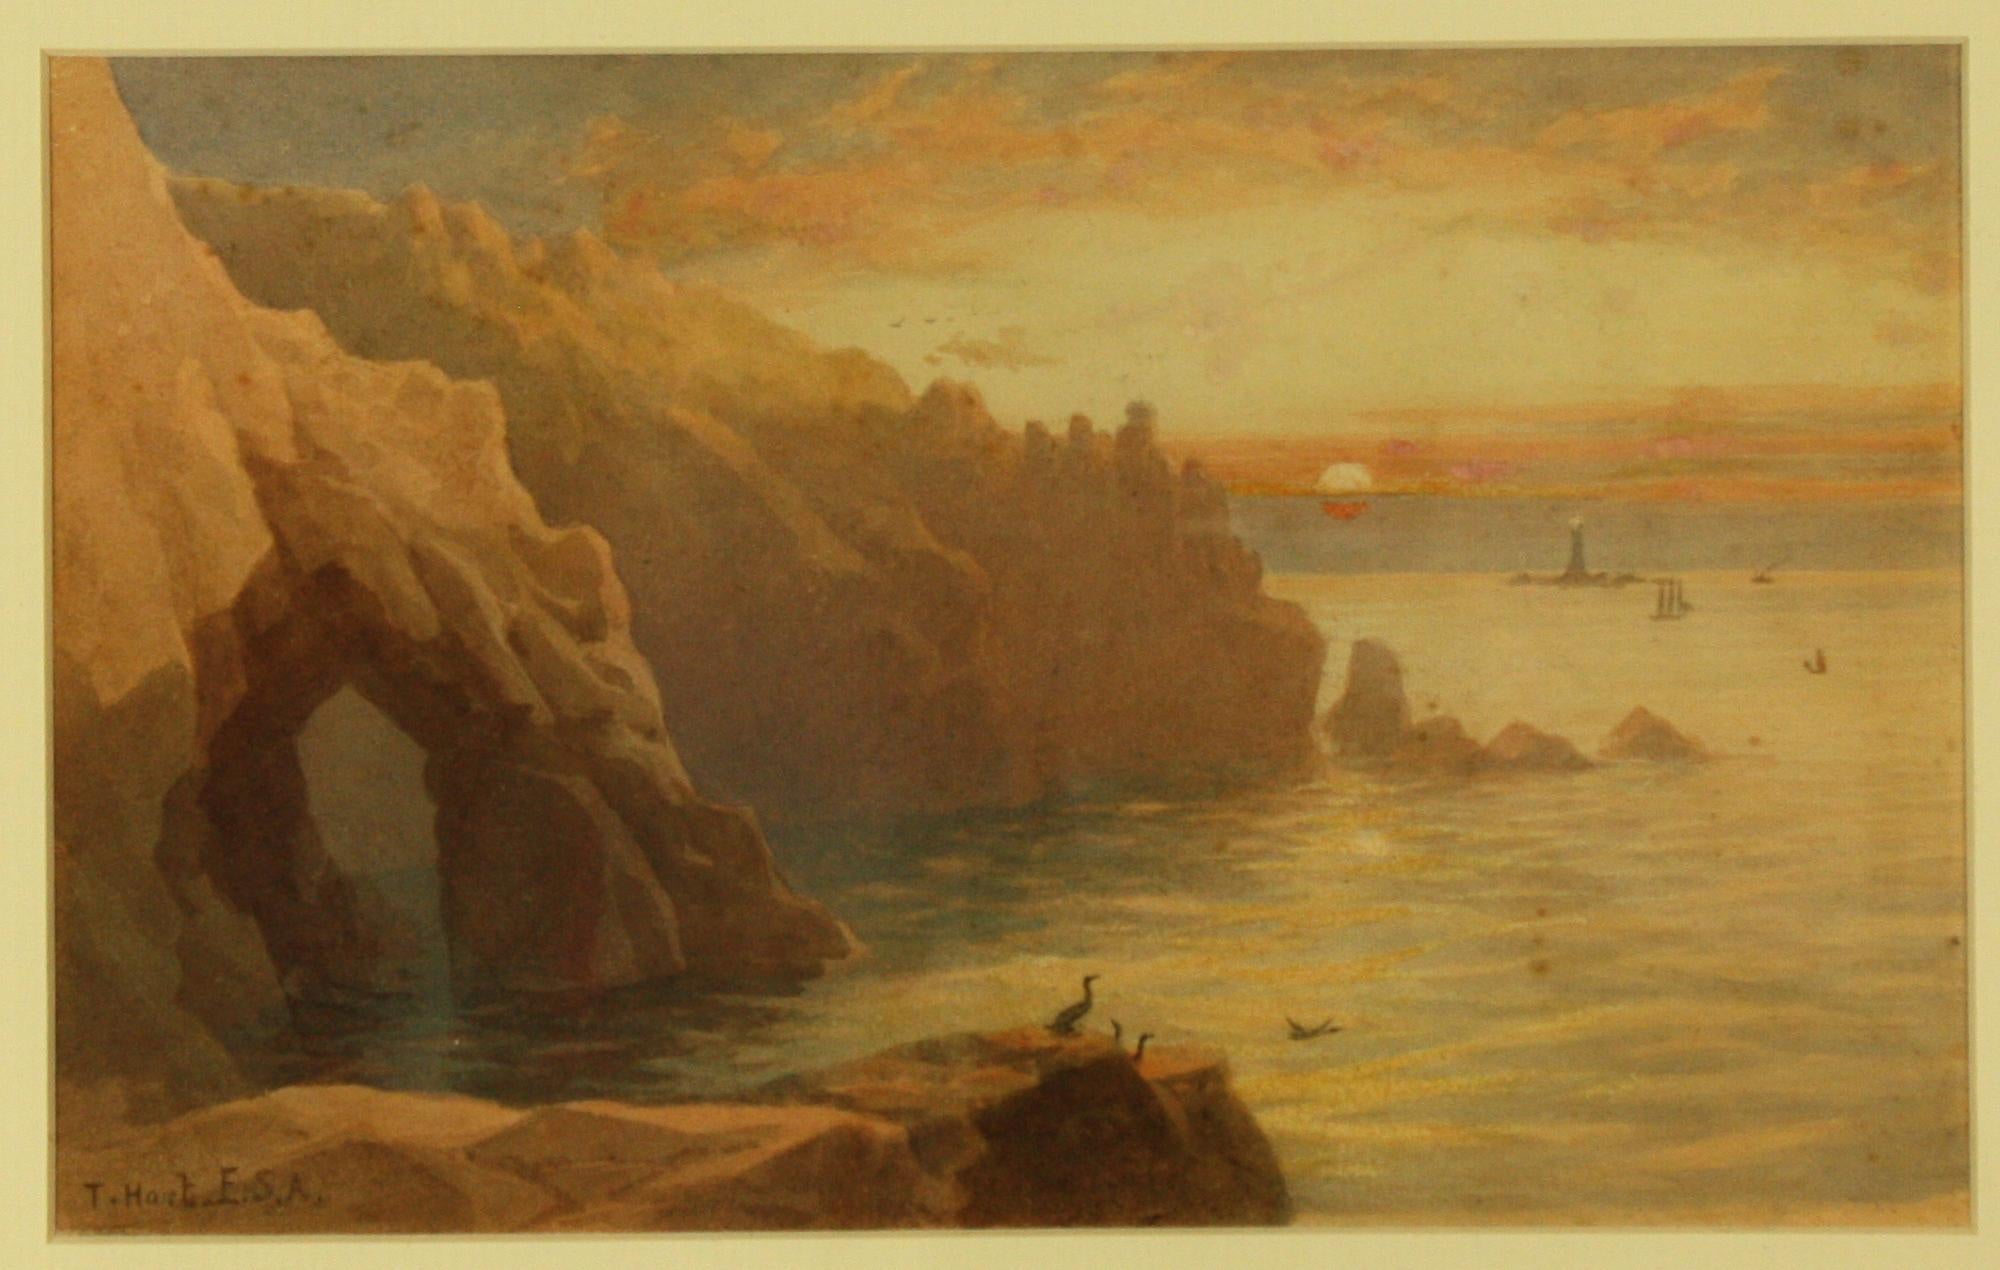 Gamper Arch, The Lands End and Longships Lighthouse by Thomas Hart FSA
Image Size 6.75 ins by 10.75 ins
Overall Frame Size  14 ins by 18.25 ins

Thomas Hart 
Born 1830 Crowan Cornwall, Died 1916 The Lizard, Cornwall
Thomas was a prolific painter in